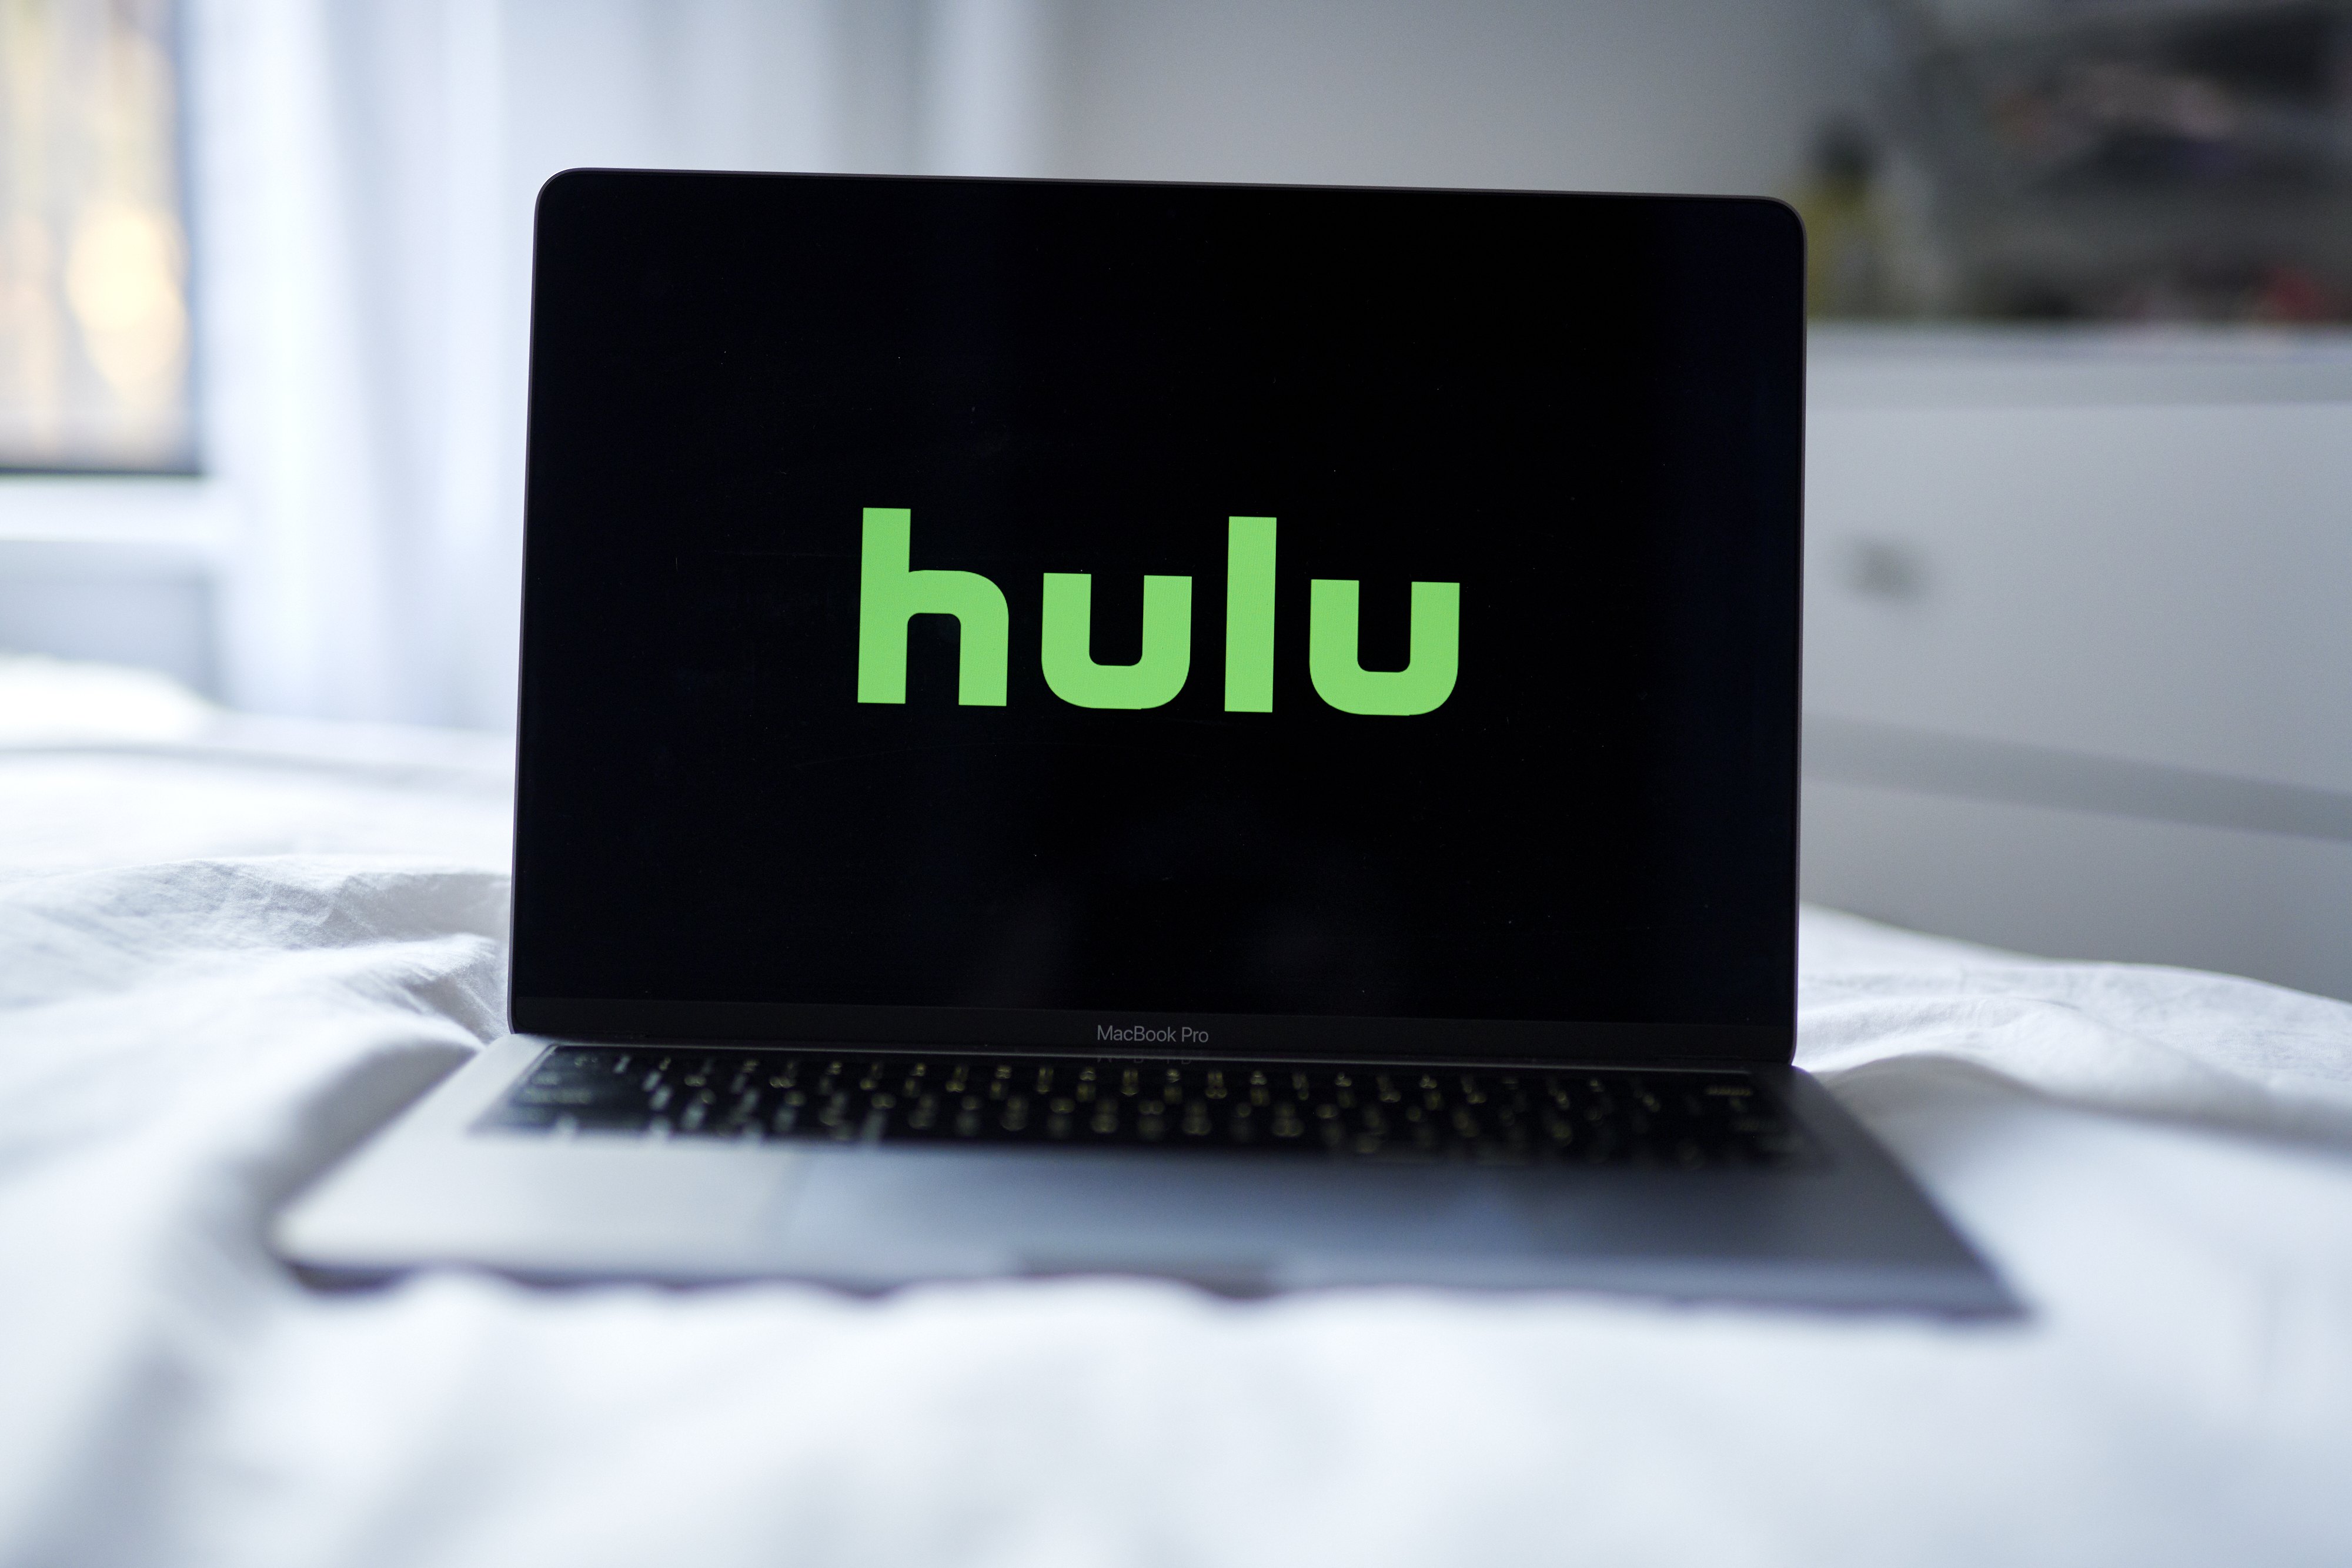 Deal Alert! Here’s How to Save $60 on Three Months of Hulu + Live TV